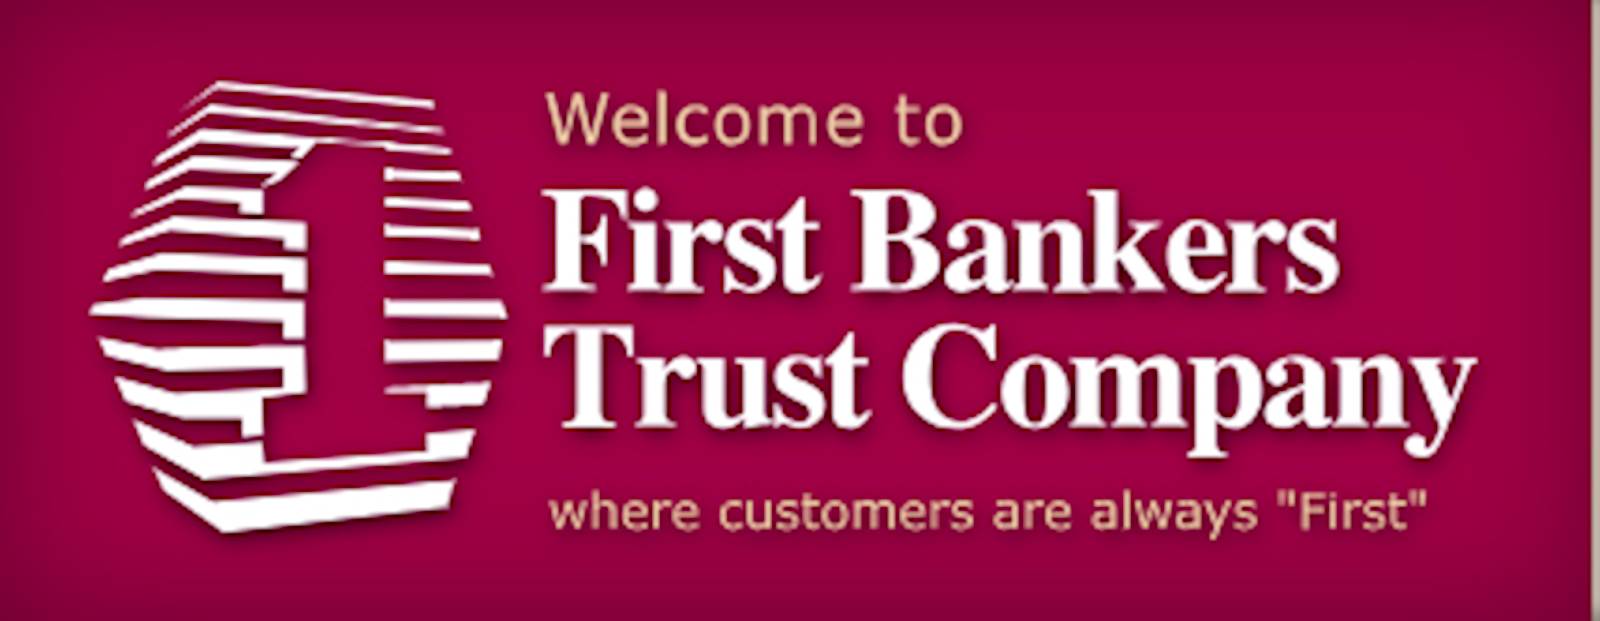 First Bankers Trust Company.jpg